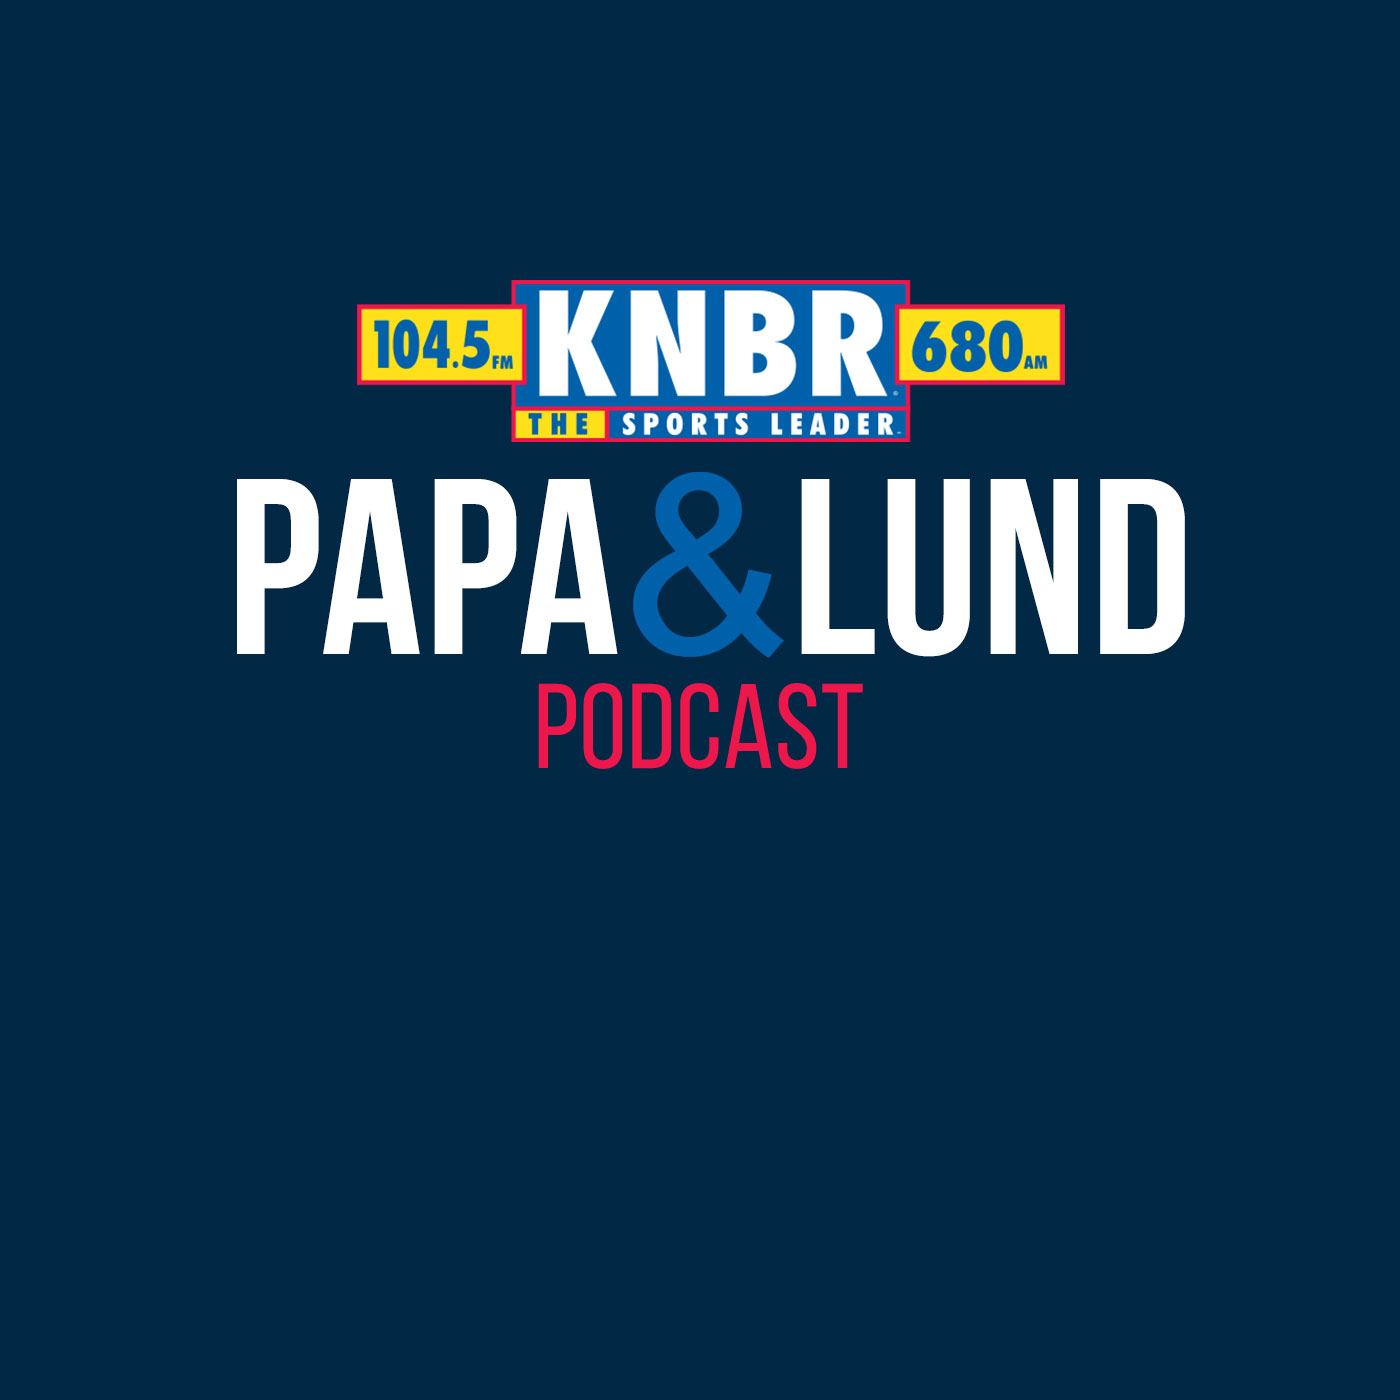 4-15 James Ham joins Papa & Lund to break down the matchup between the Warriors & Kings and provides important health updates for the Kings as they prepare to host the Warriors in the Play-In